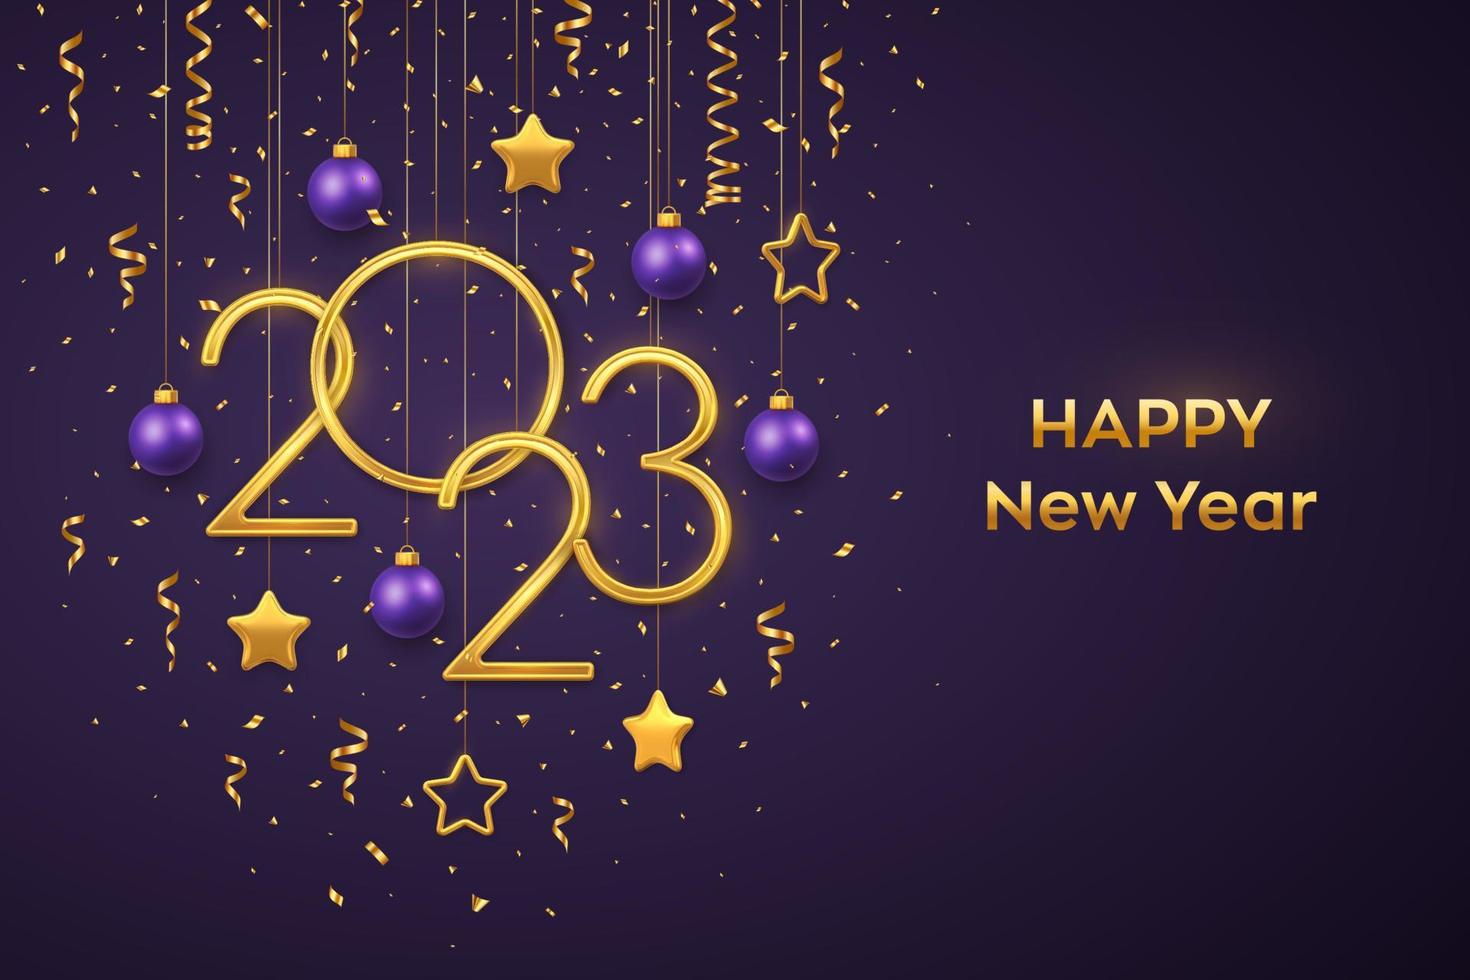 Happy New 2023 Year. Hanging Golden metallic numbers 2023 with shining 3D metallic stars, balls, confetti on purple background. New Year greeting card, banner template. Realistic Vector illustration.